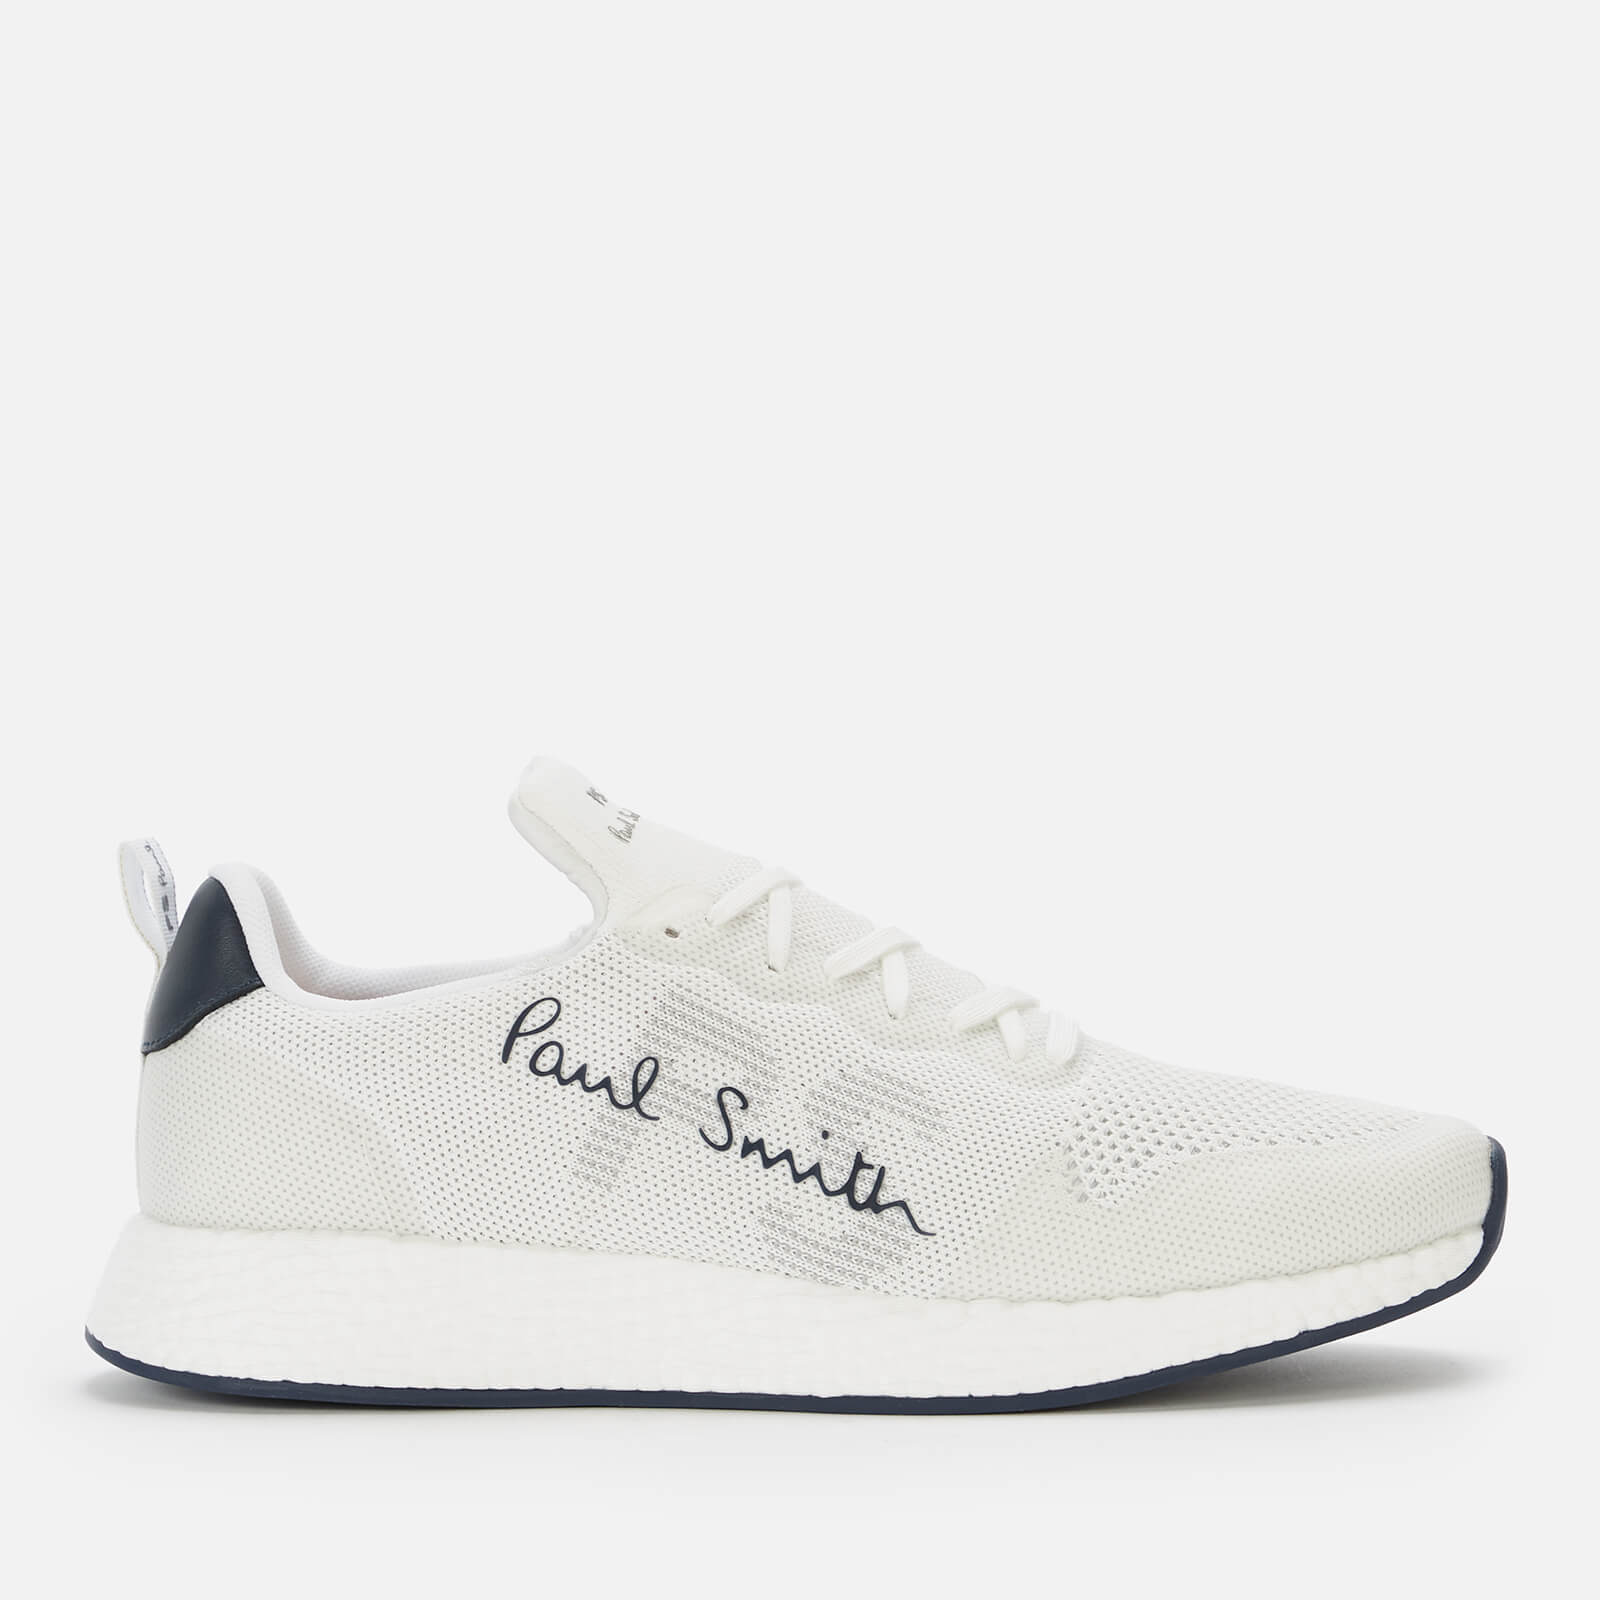 PS Paul Smith Men's Krios Running Style Trainers - White - UK 7